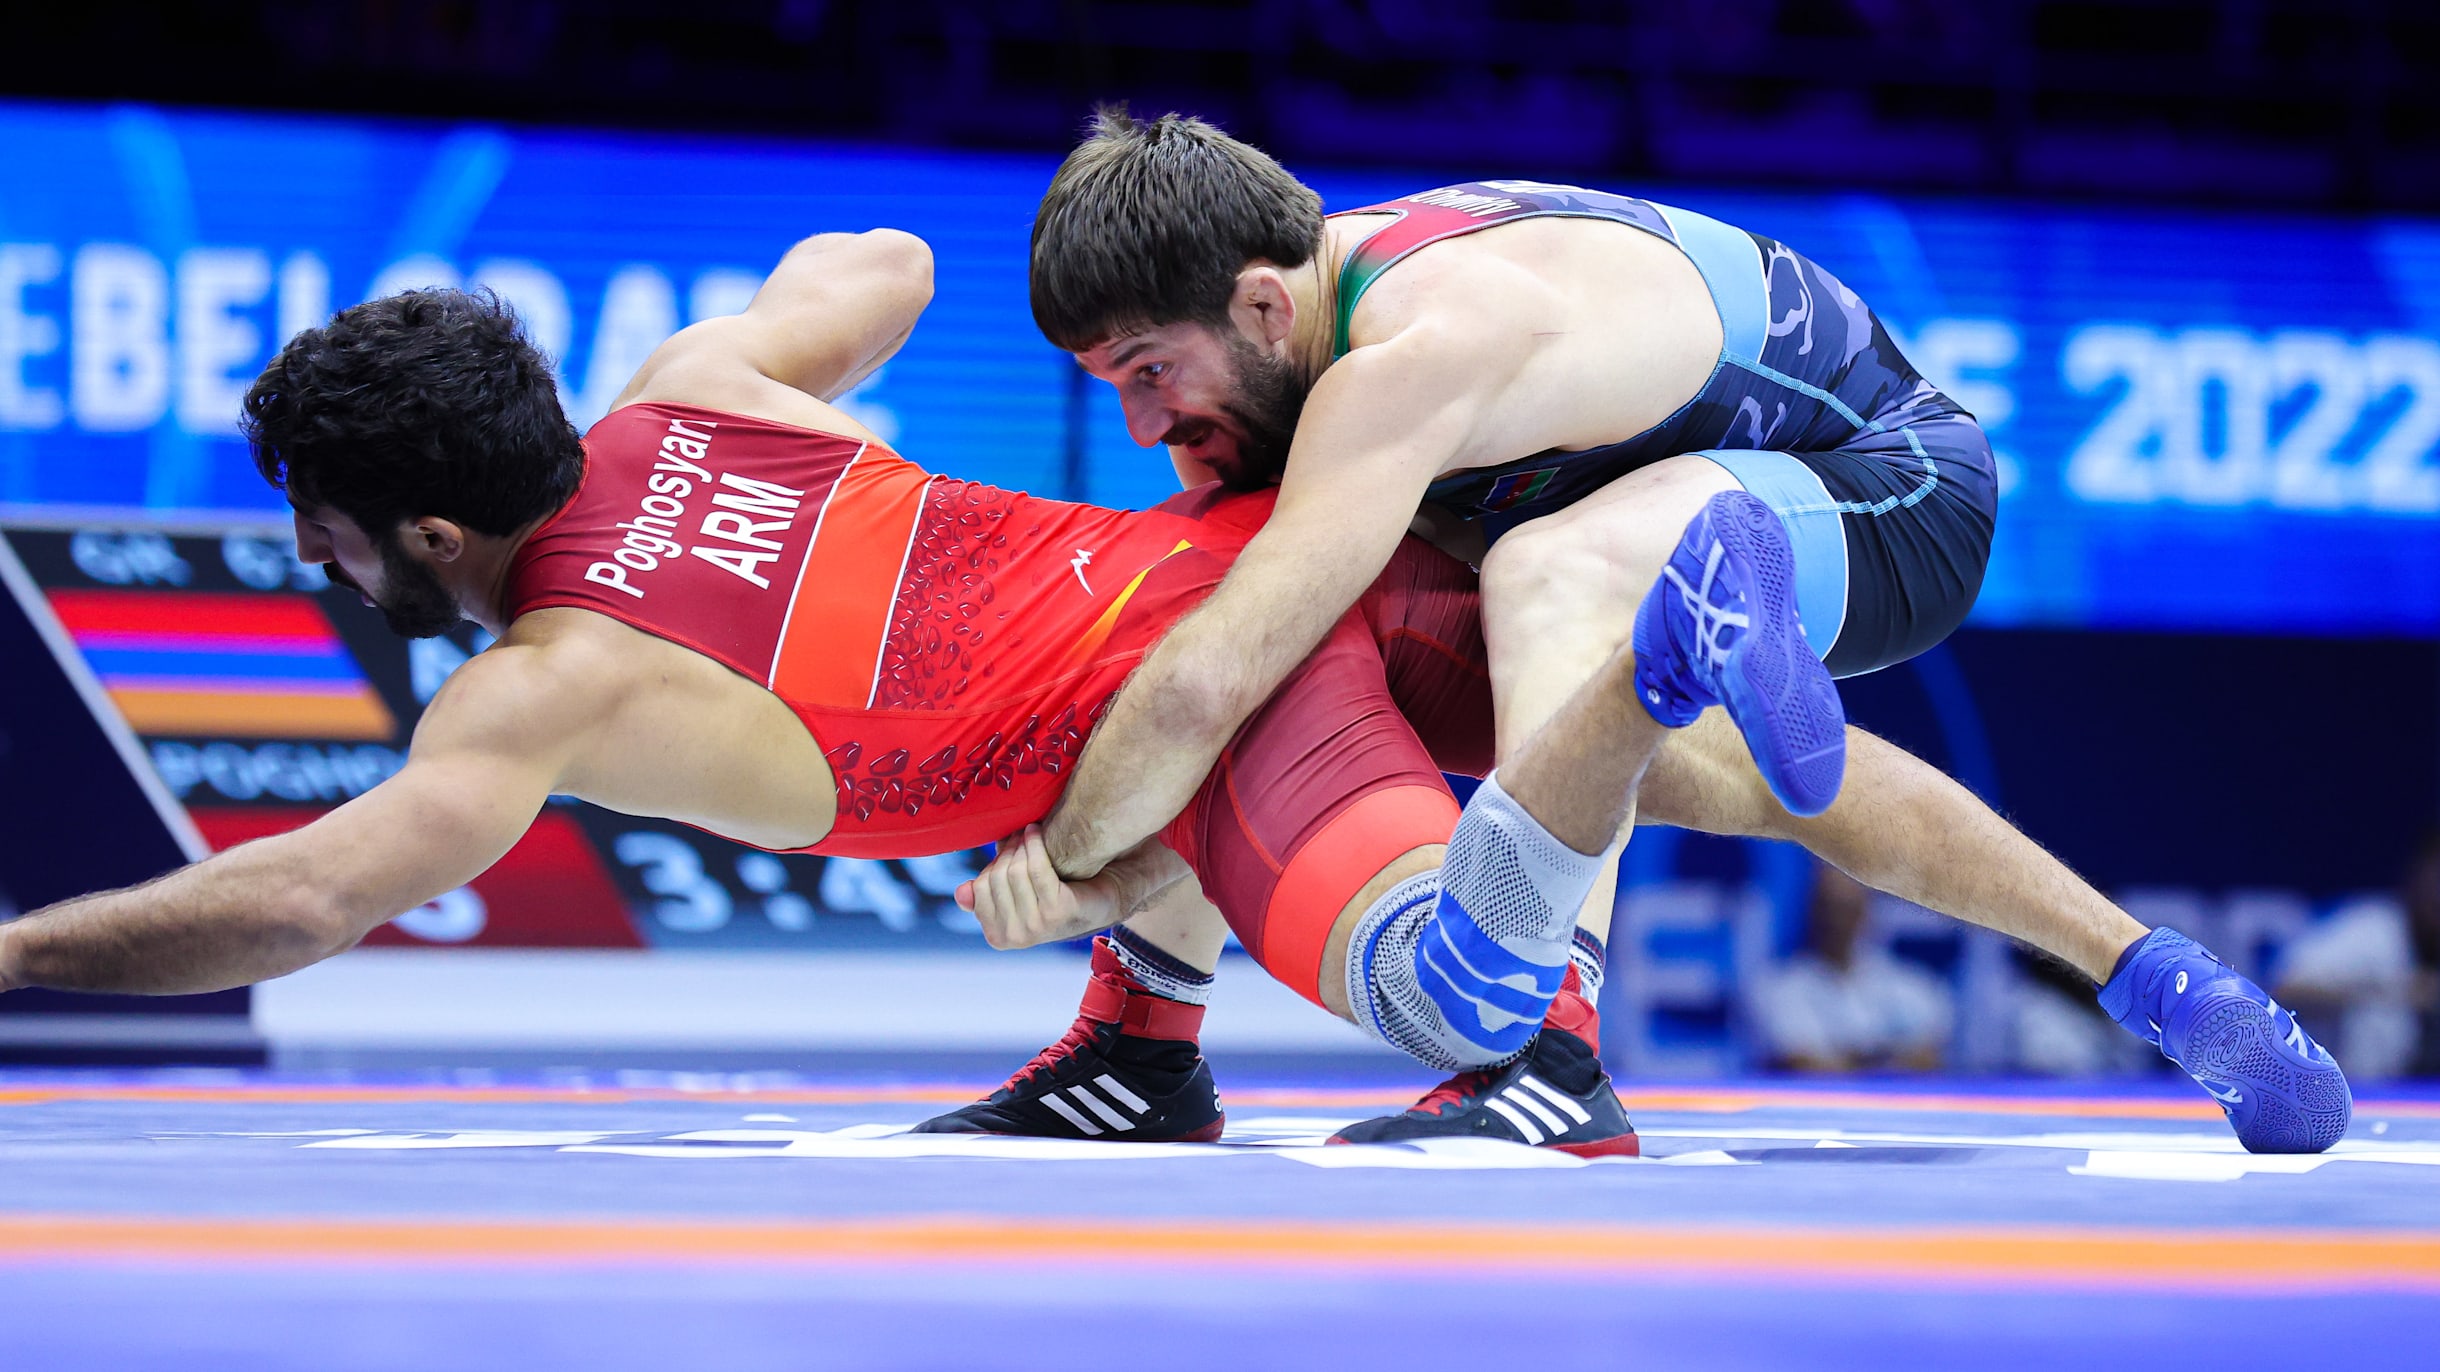 The power of sport at the World Wrestling Championships 2022